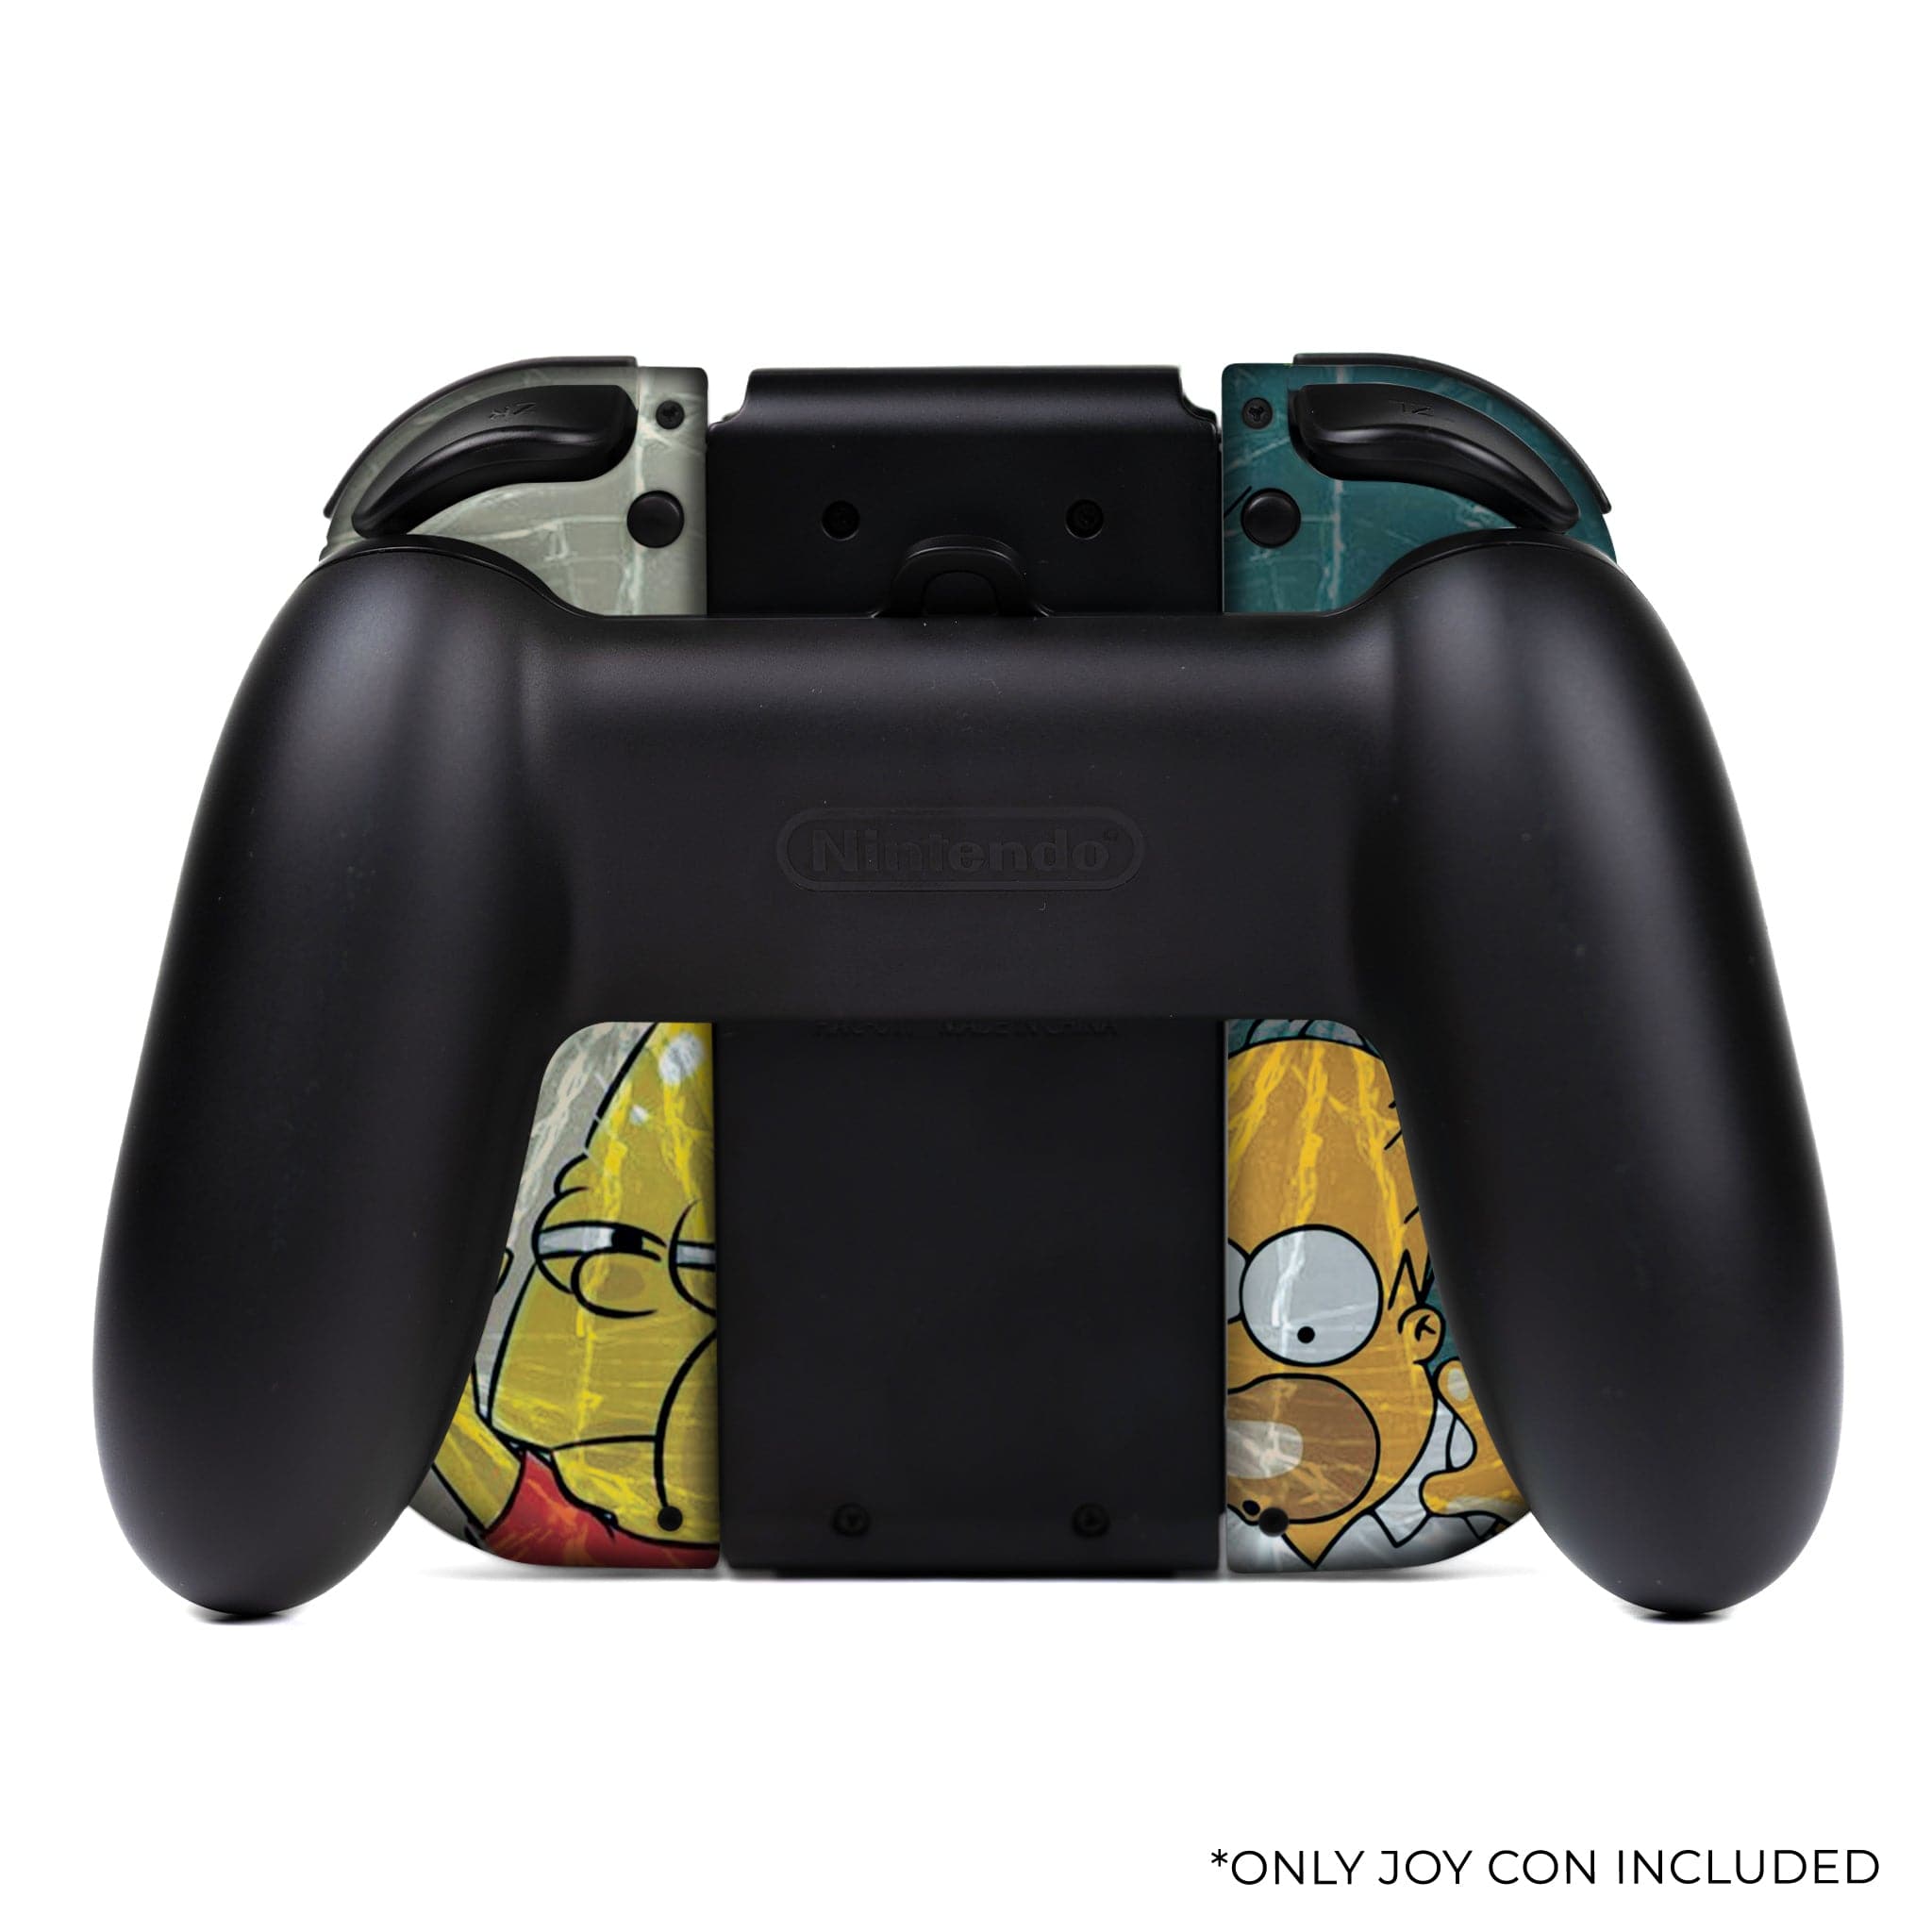 Simpsons Inspired Nintendo Switch Joy Con (L/R) Controllers